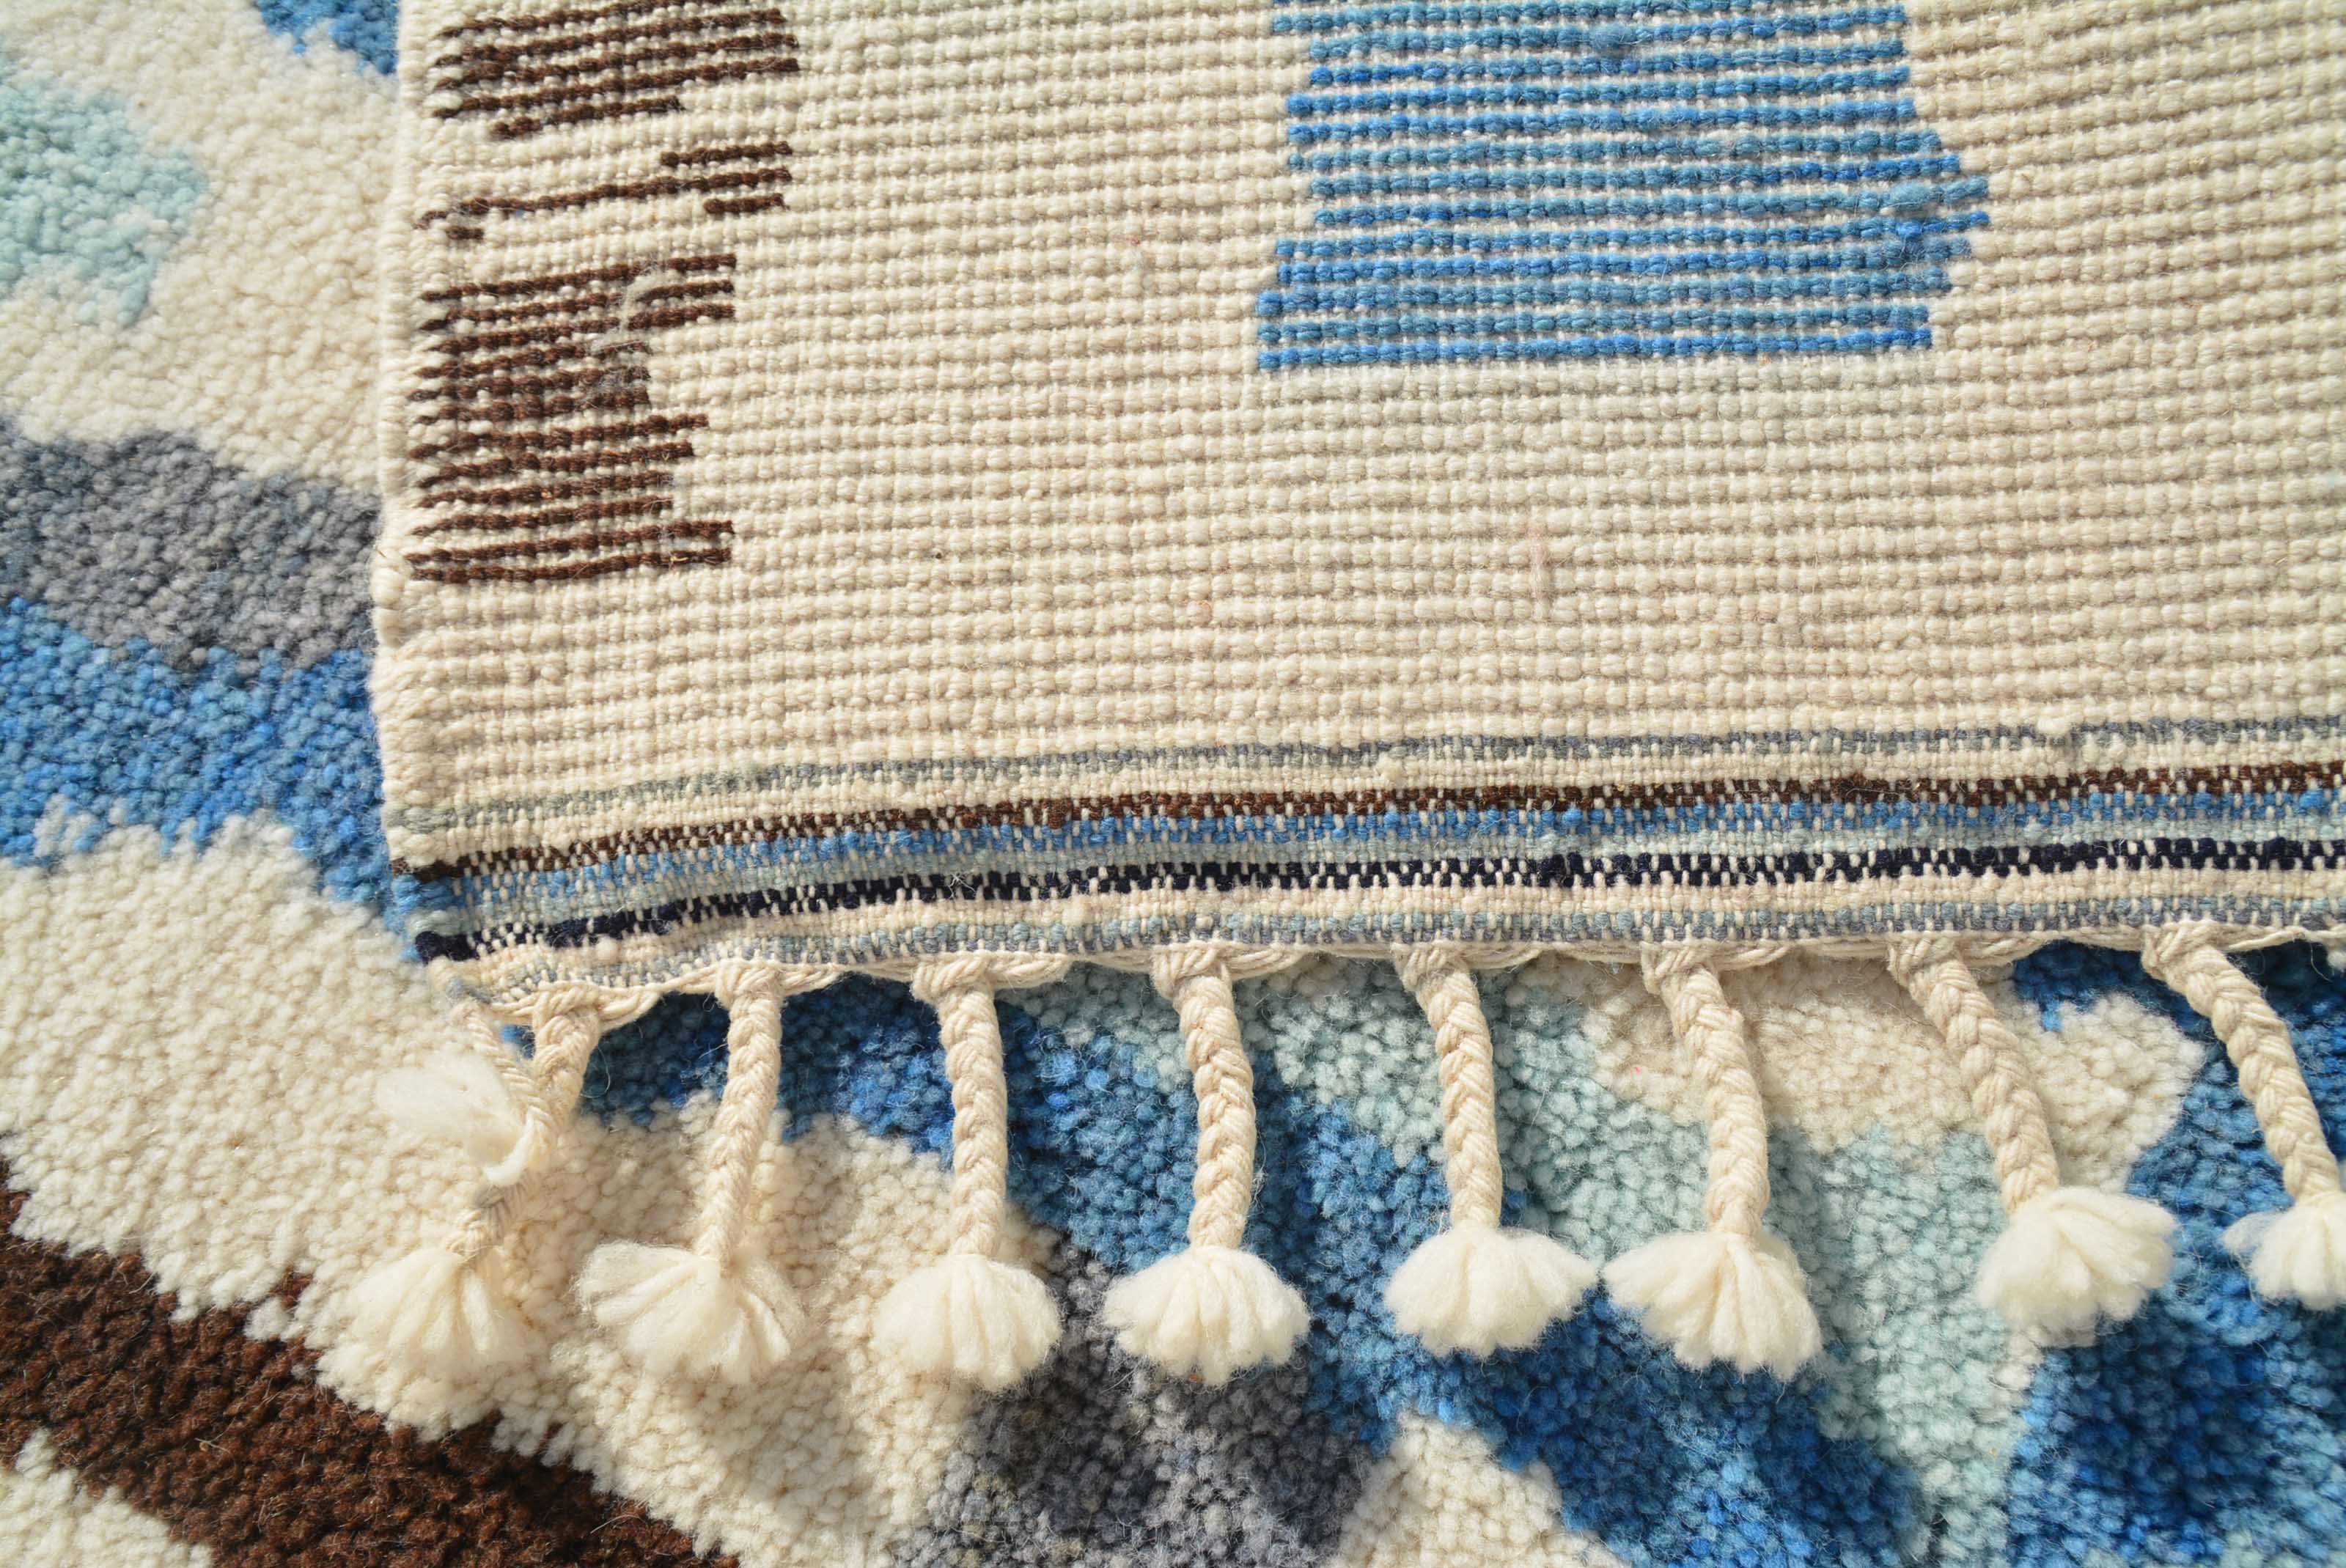 Blue Haven - Handmade Moroccan Rug with Blue Addal Design - Add a touch of serenity to your home